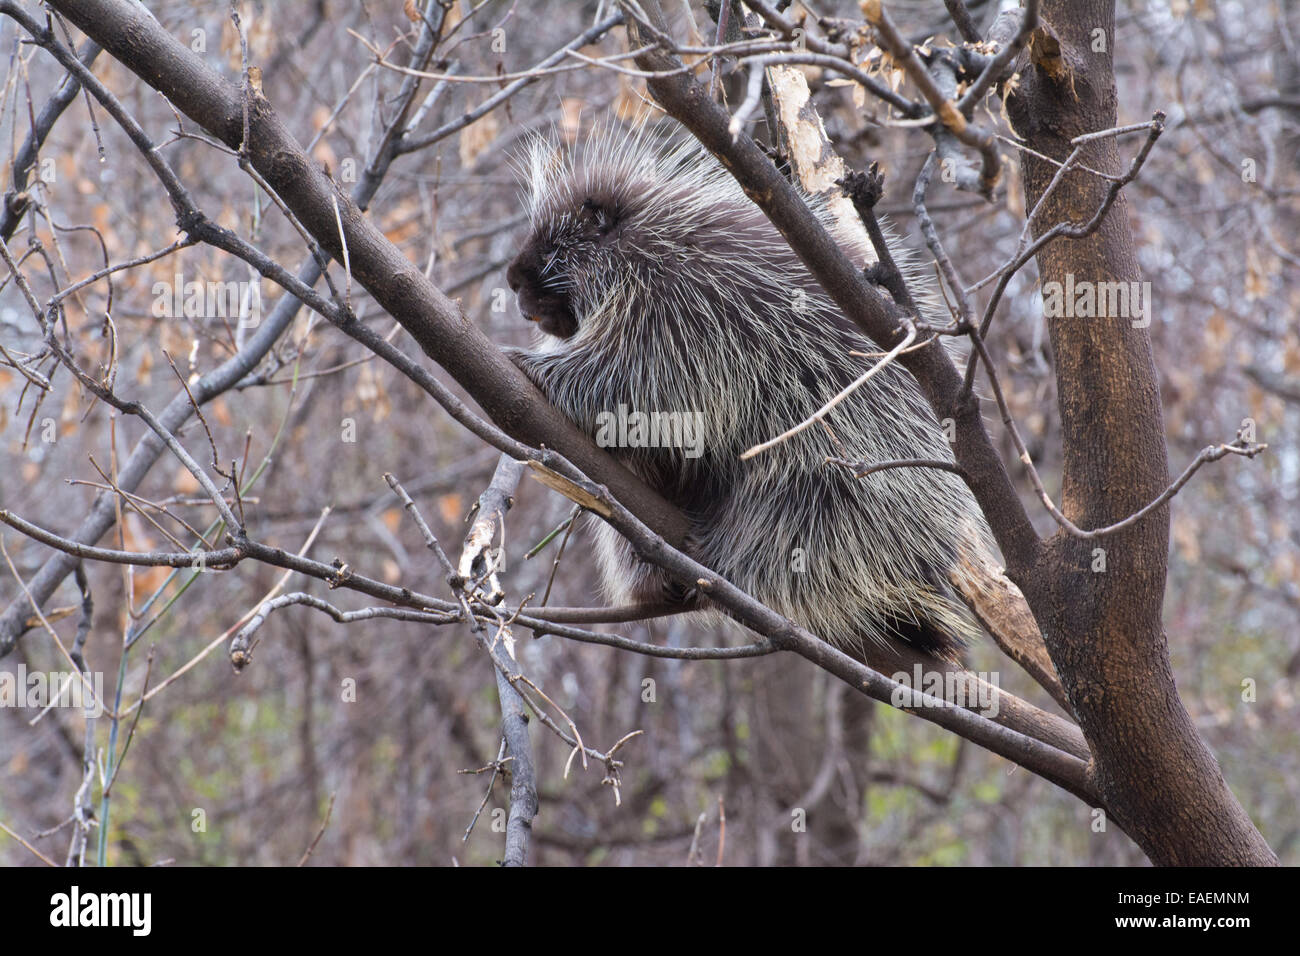 A Canadian Porcupine. Stock Photo